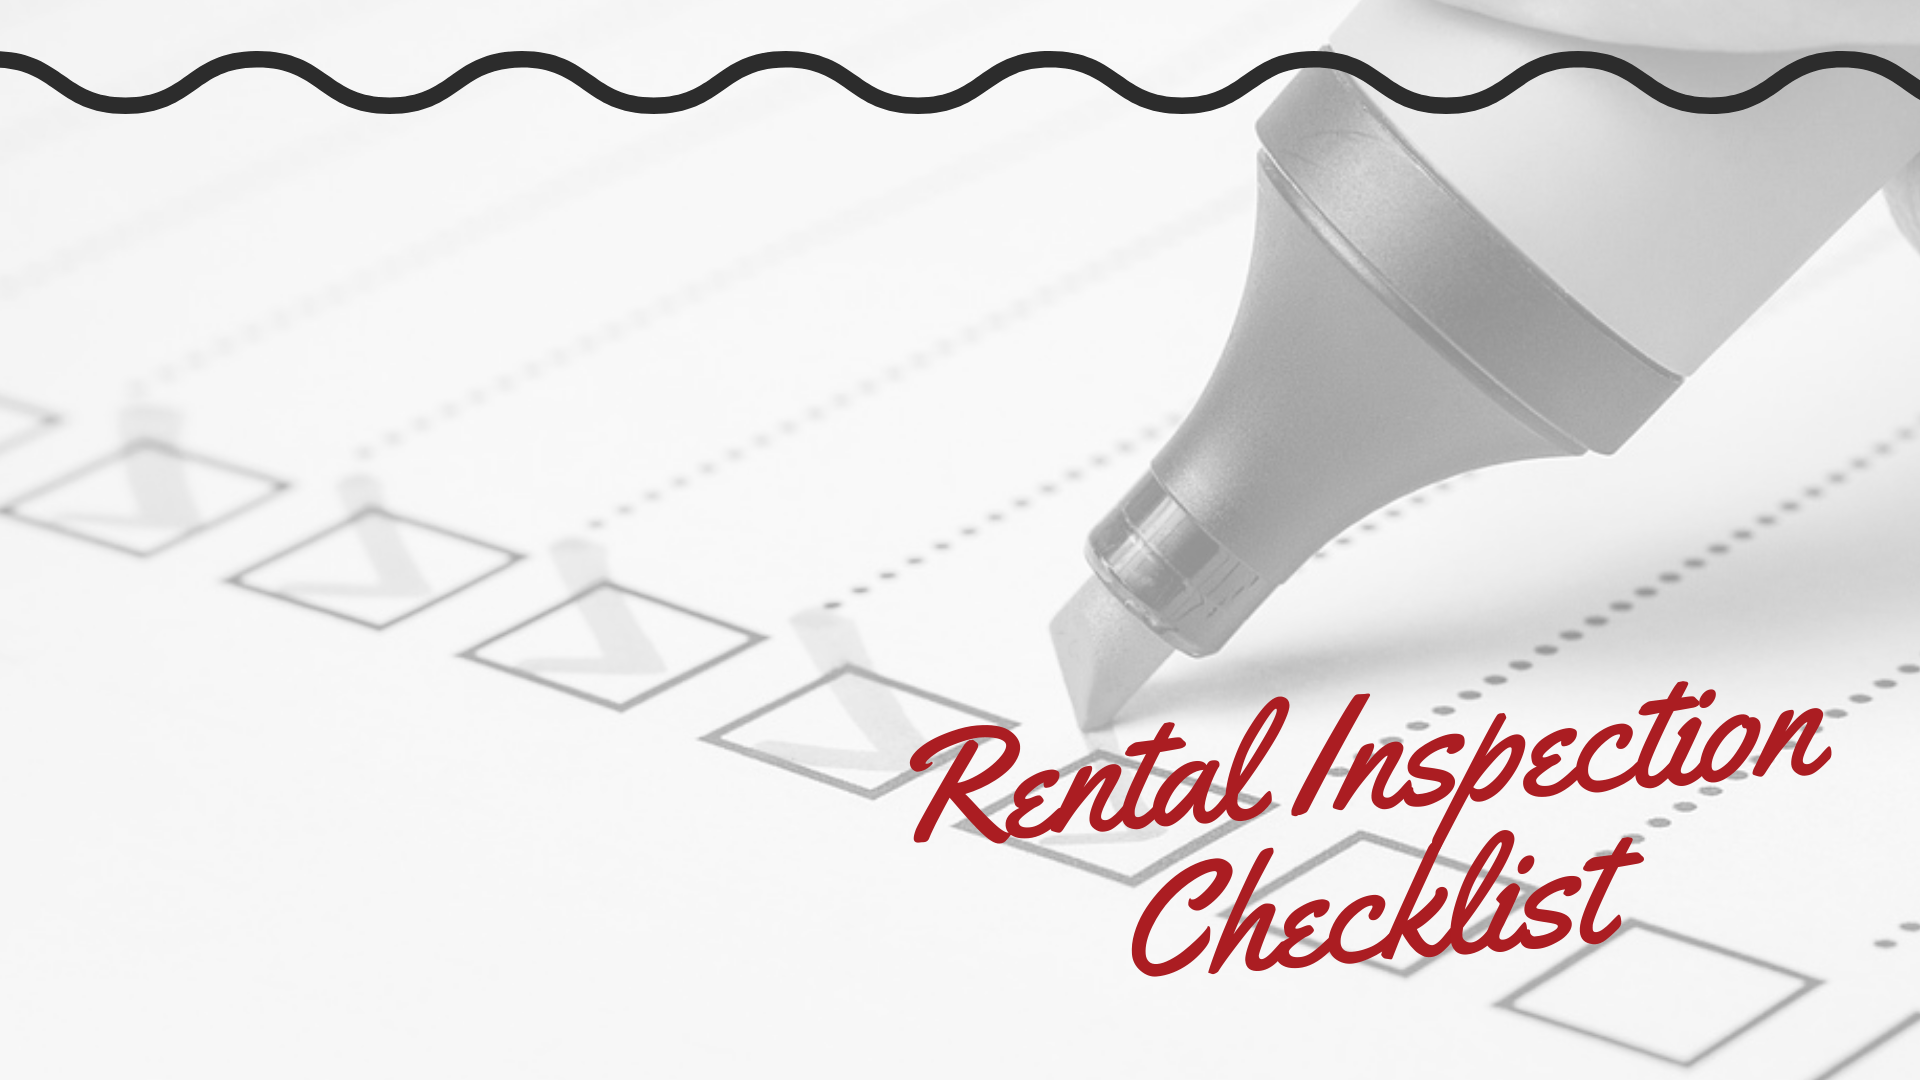 Rental Inspection Checklist - What Should You Look for in Orange County Rentals?